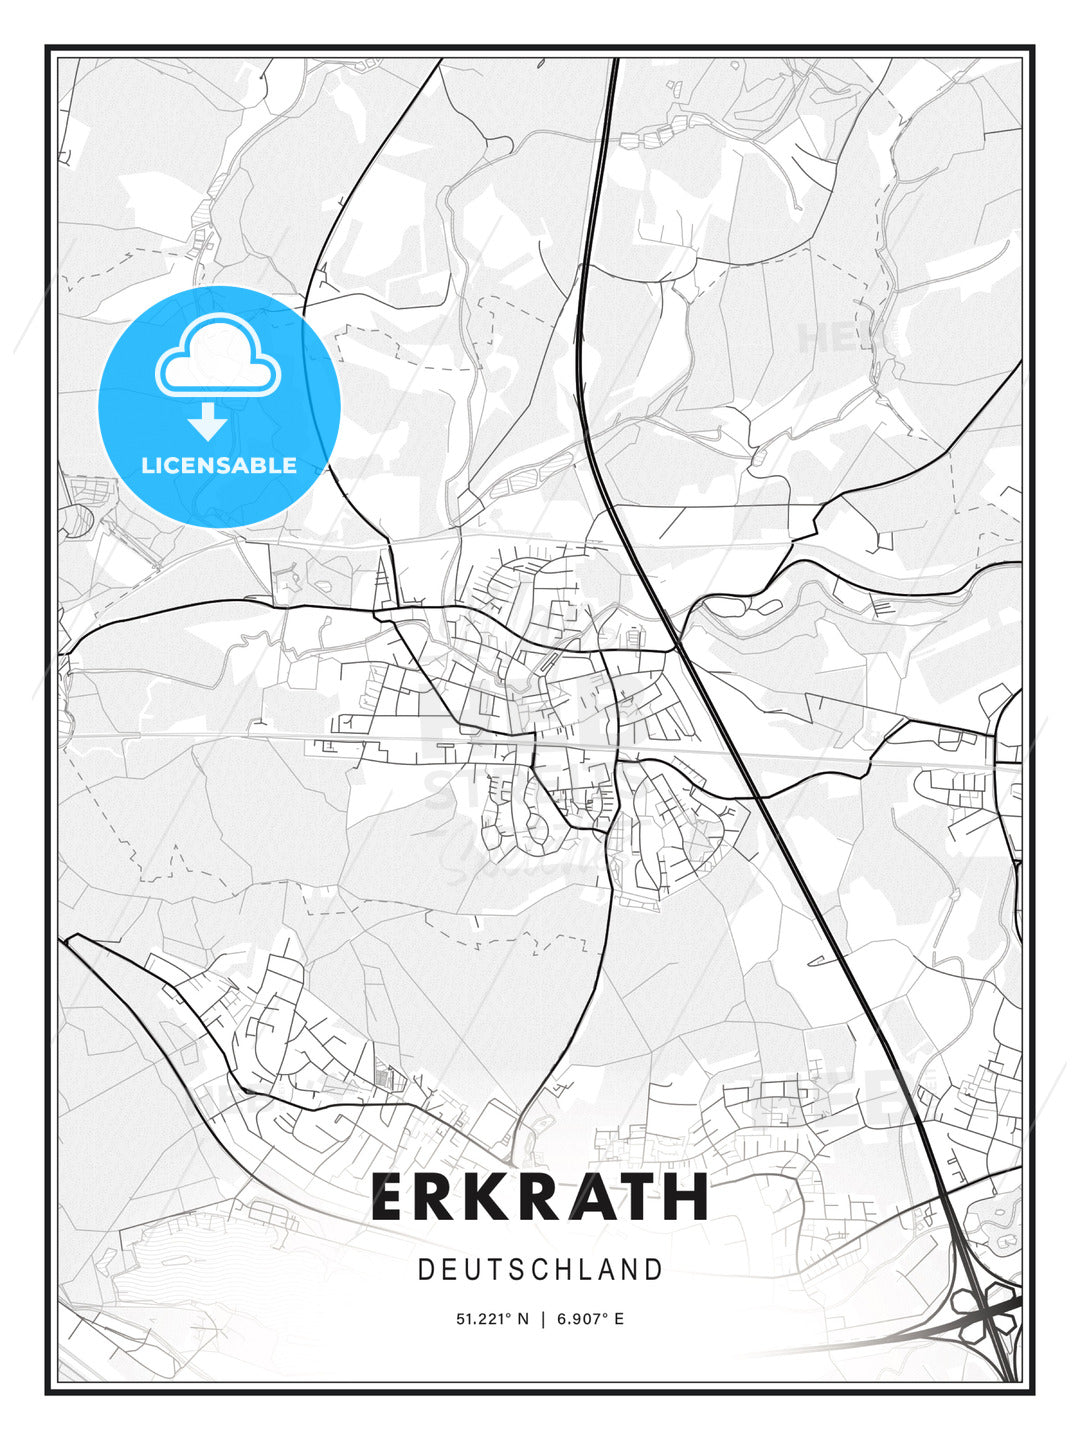 Erkrath, Germany, Modern Print Template in Various Formats - HEBSTREITS Sketches